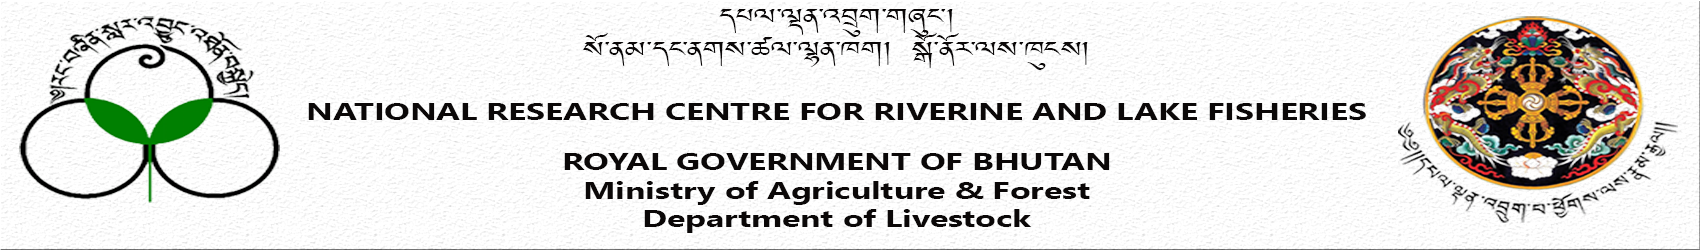 National Research Centre For Riverine And Lake Fisheries